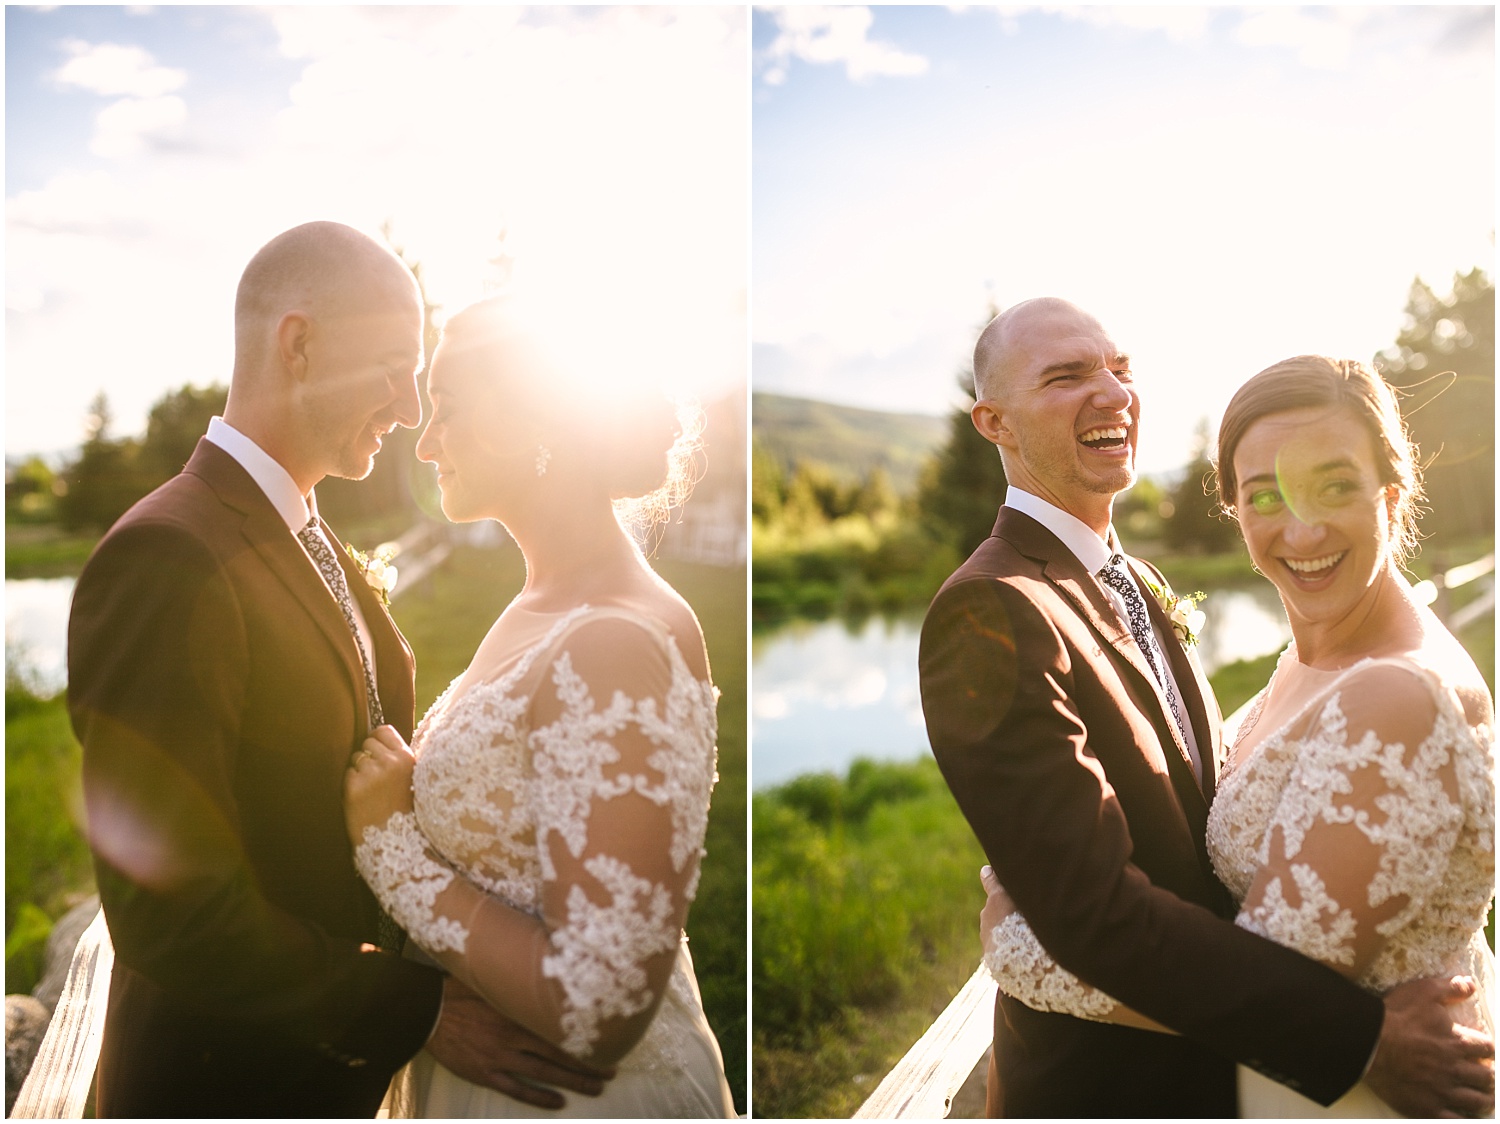 Bride and groom laughing at golden hour at Ski Tip Lodge wedding in Keystone Colorado